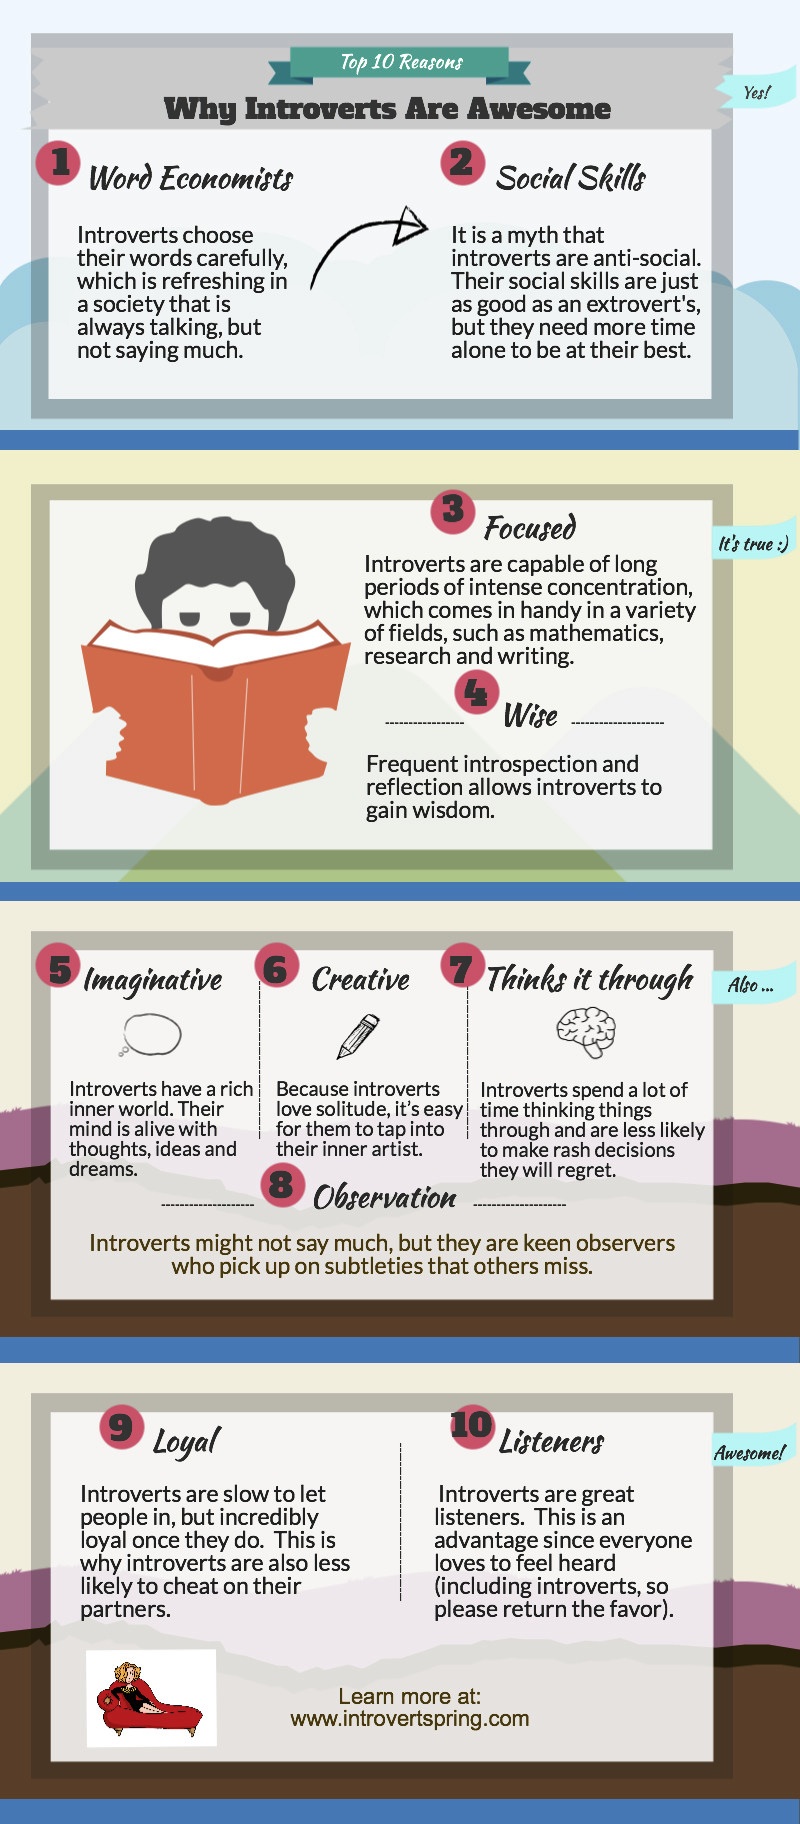 Top 10 Reasons Why Introverts Are Awesome Infographic